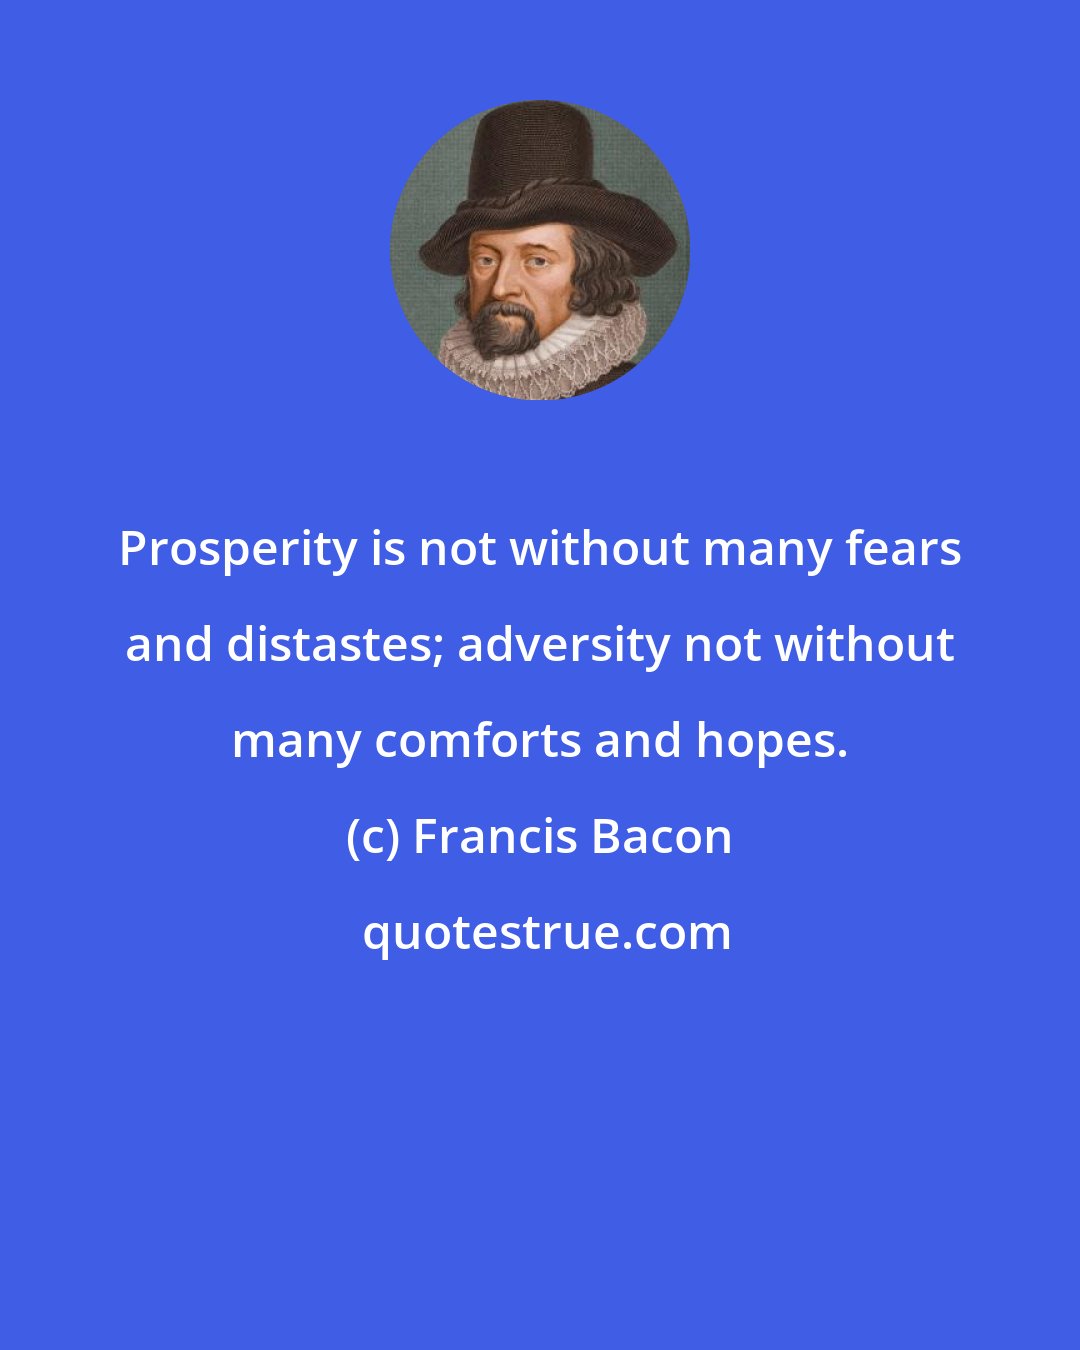 Francis Bacon: Prosperity is not without many fears and distastes; adversity not without many comforts and hopes.